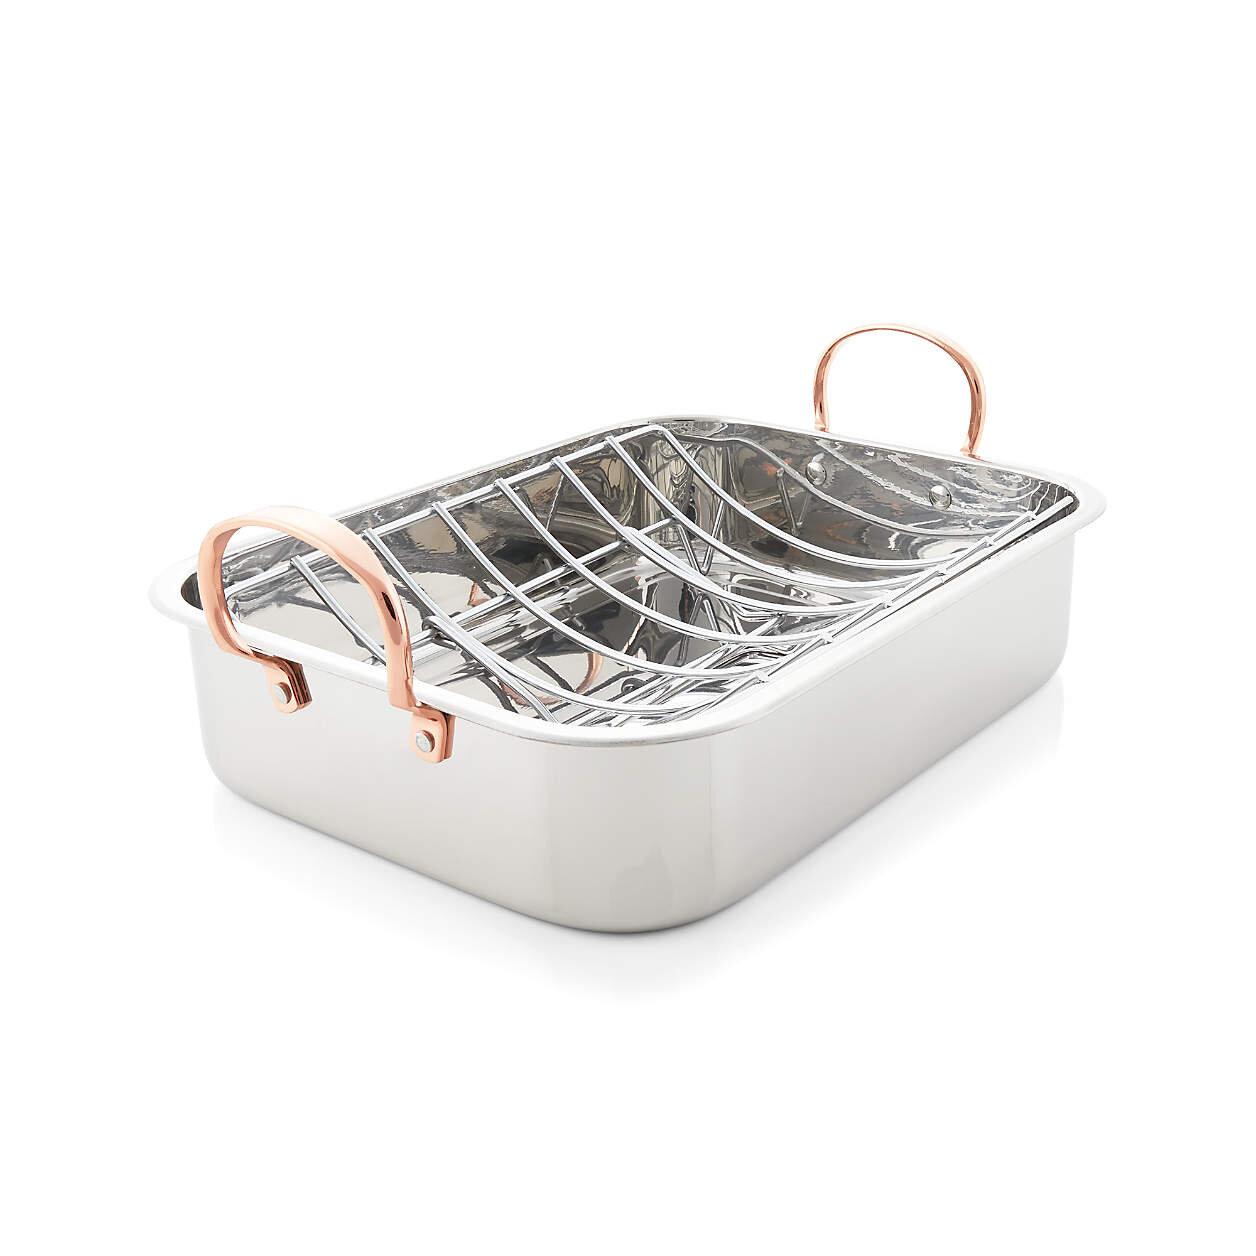 Stainless Steel Roasting Pan with Copper Handles (EXCLUSIVE)